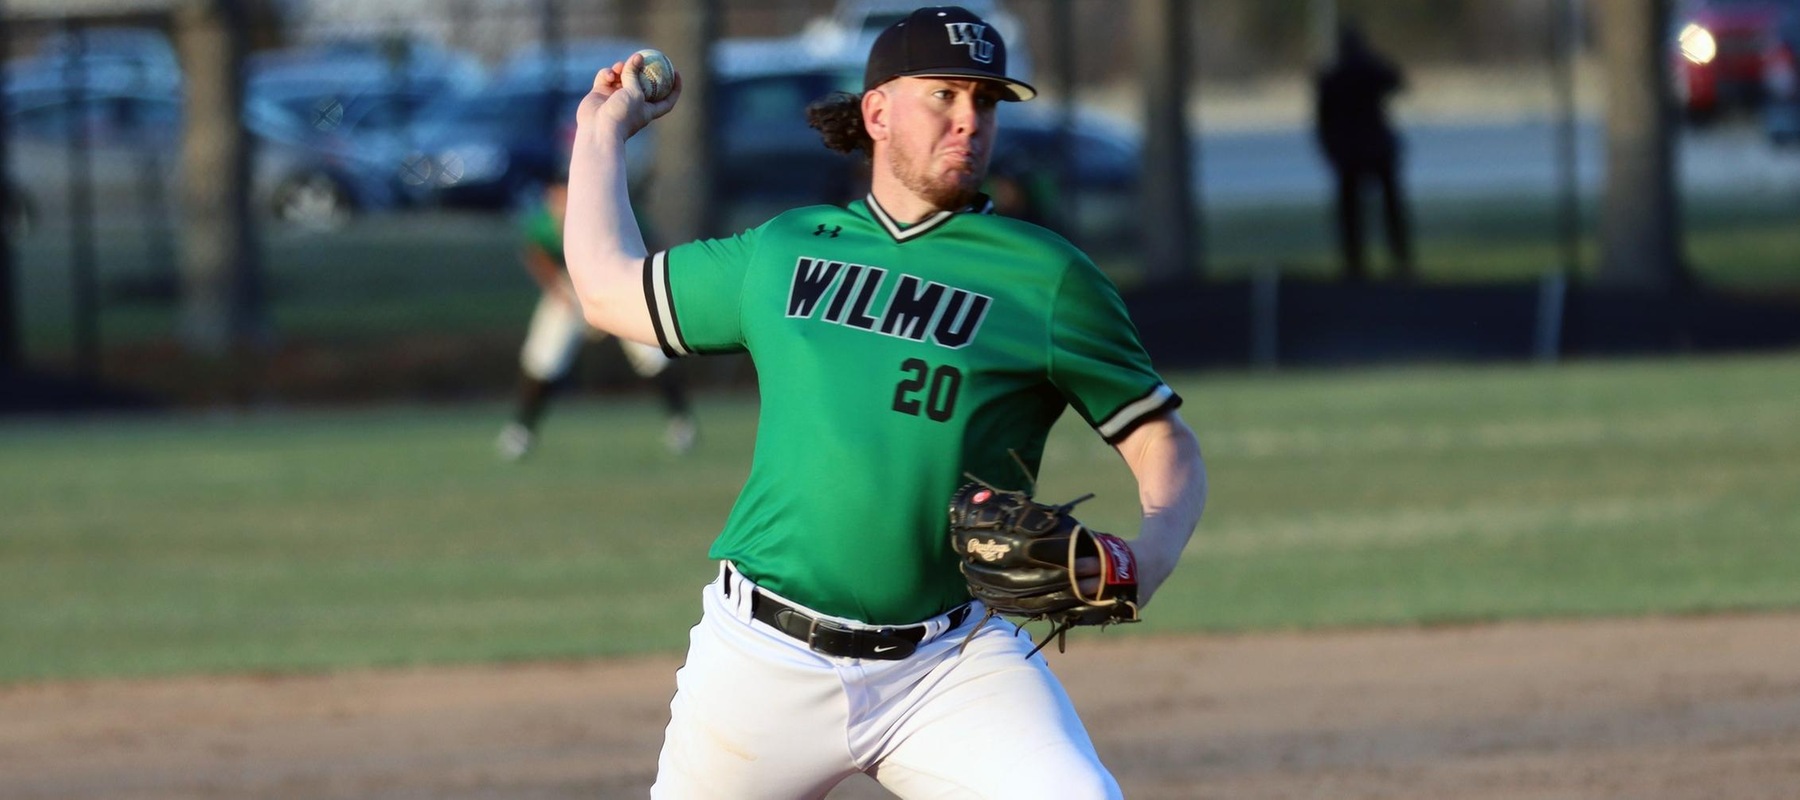 File photo of AJ Stento who picked up his 7th save of the year in game two at Felician. Copyright 2022; Wilmington University. All rights reserved. Photo by Erin Harvey. March 15, 2022 vs. Shippensburg